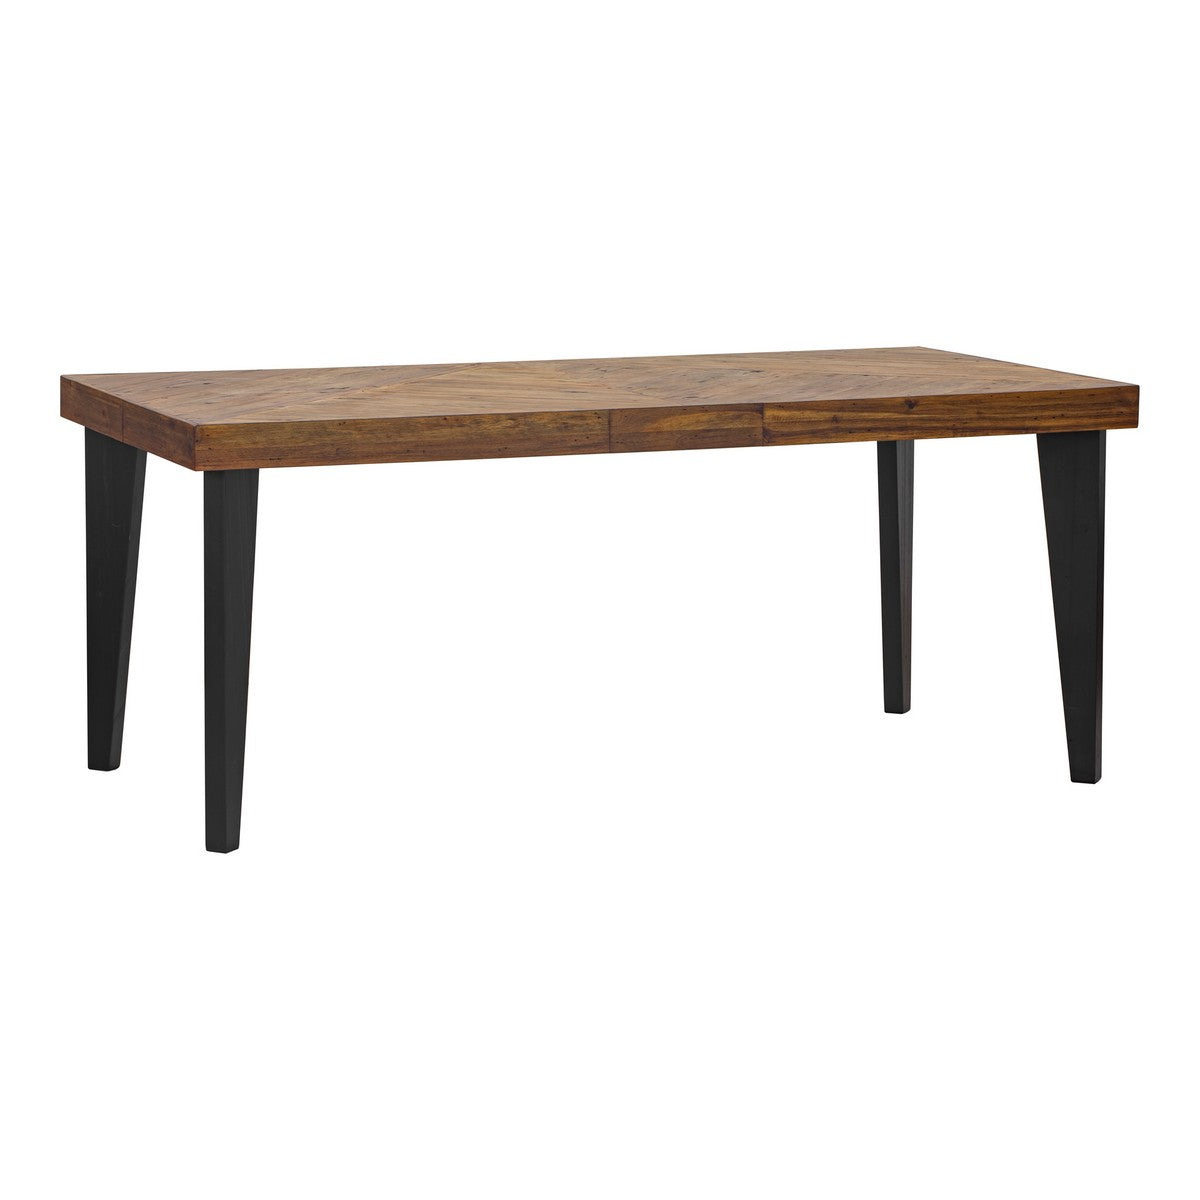 Moe's Home Collection Parq Rectangular Dining Table - TL-1009-14